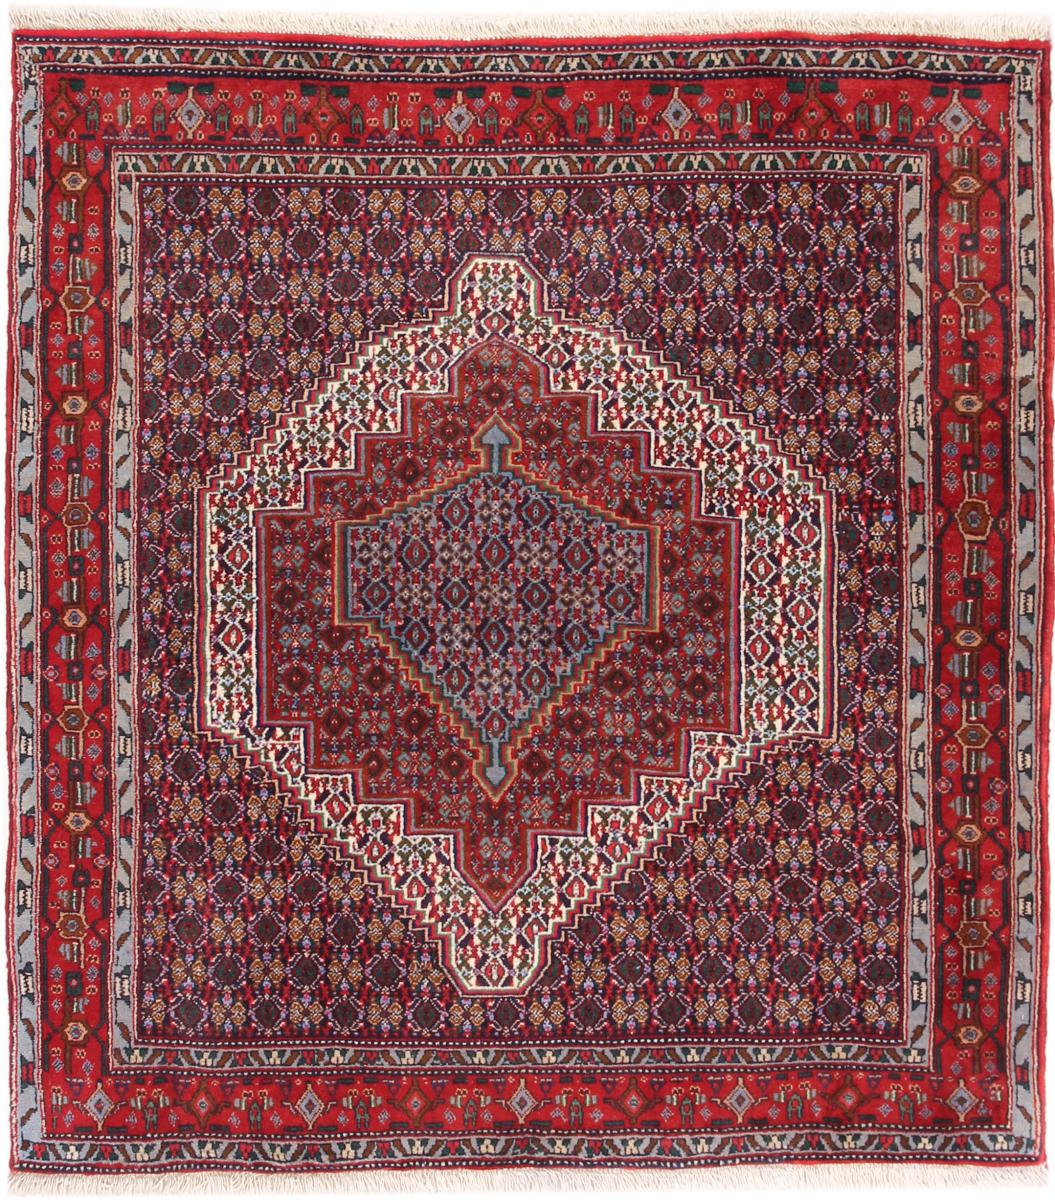 Persian Rug Senneh 4'6"x4'1" 4'6"x4'1", Persian Rug Knotted by hand